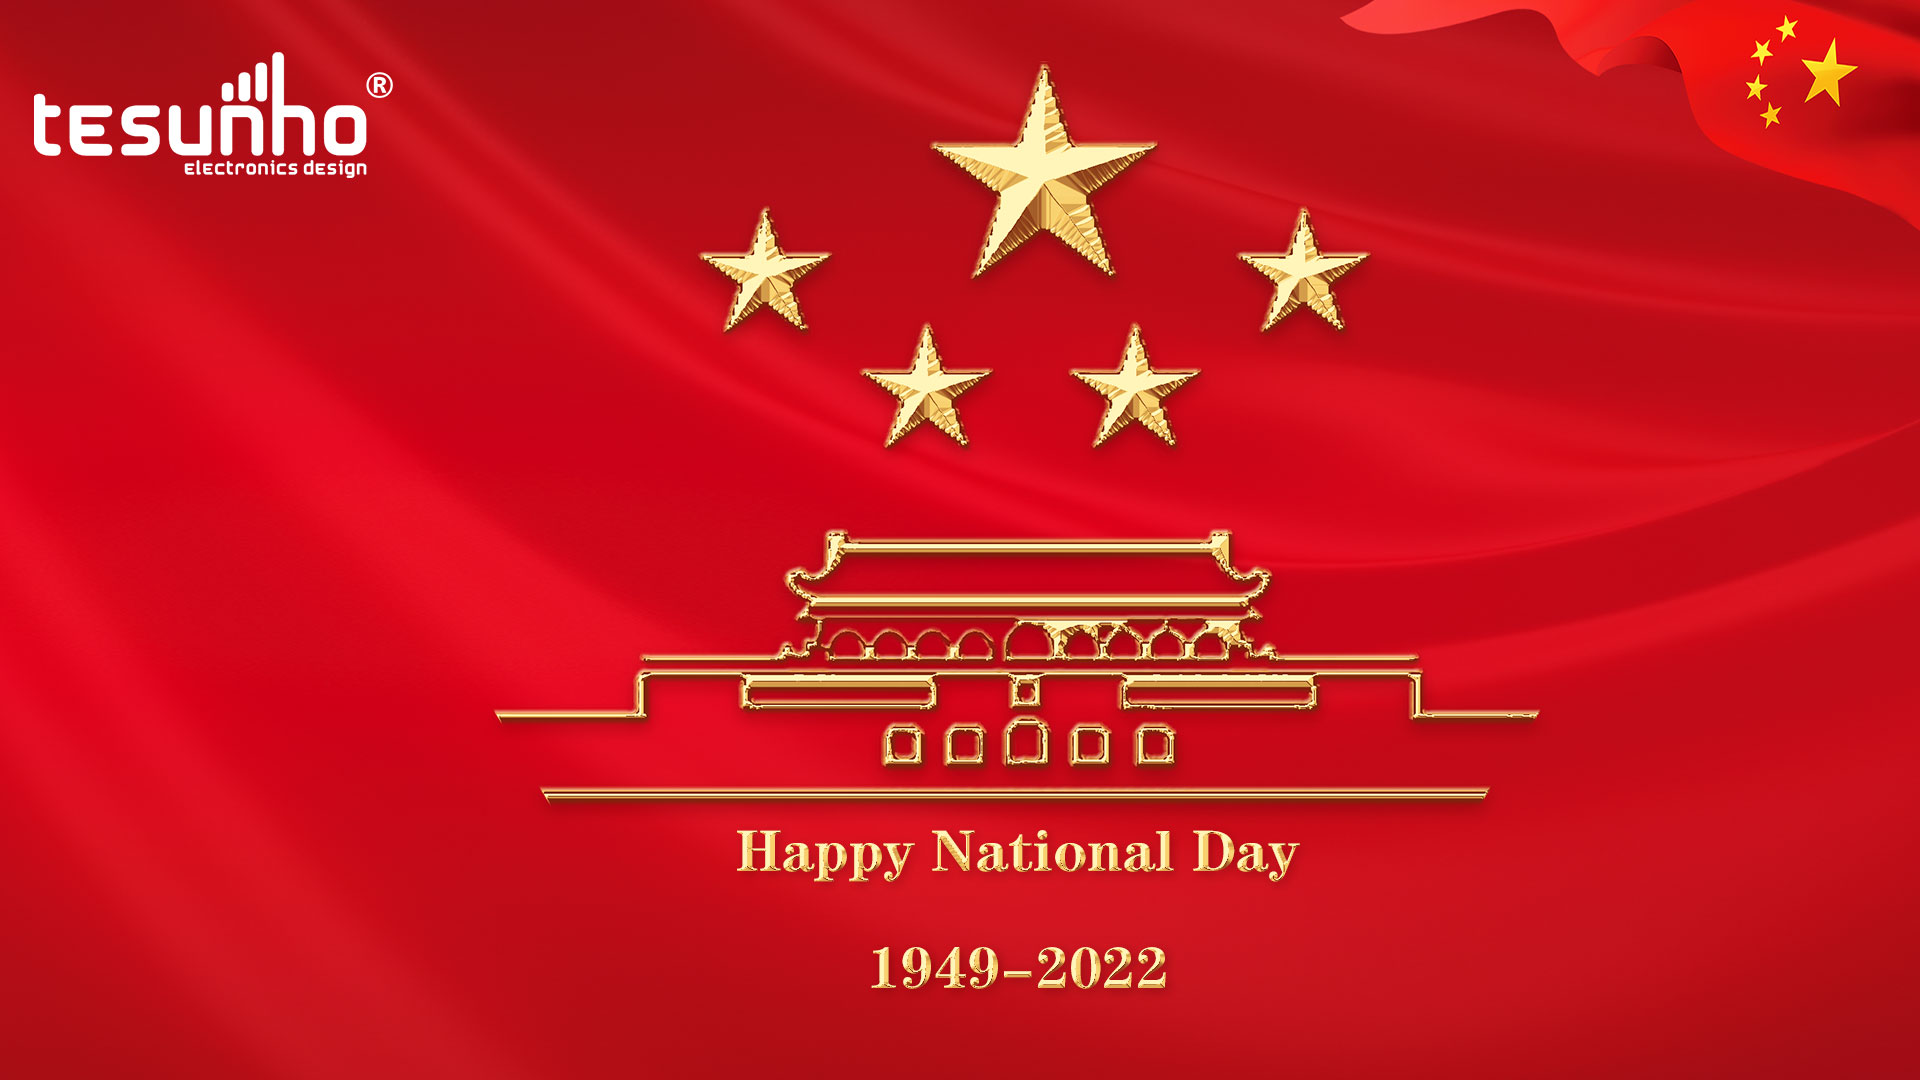 Notification of the National Day Holiday